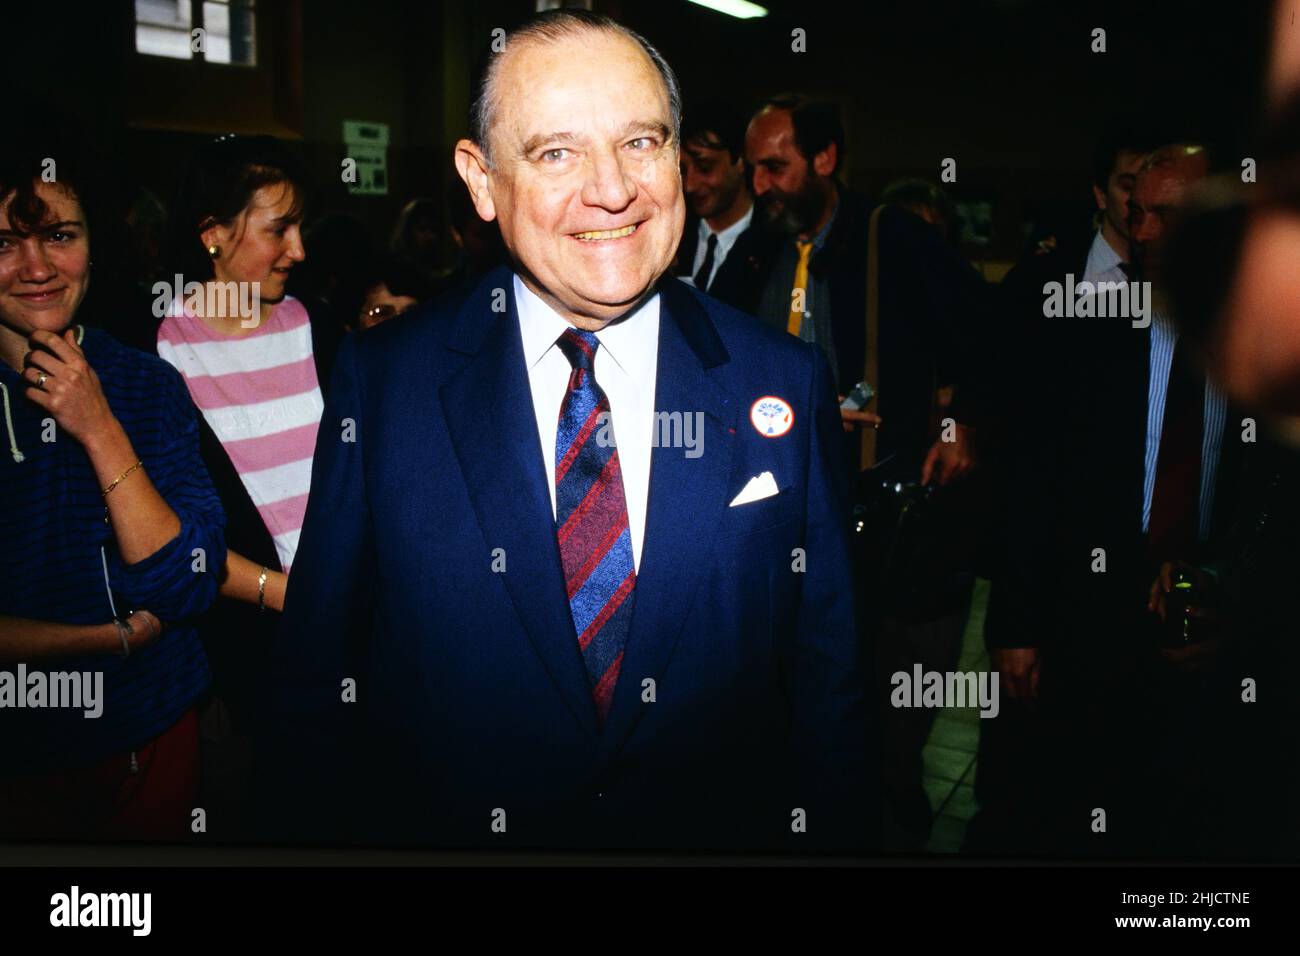 Archives 80ies: Raymond Barre attends meeting as he campaigns for Presidential elections, Lyon, France, 1988 Stock Photo